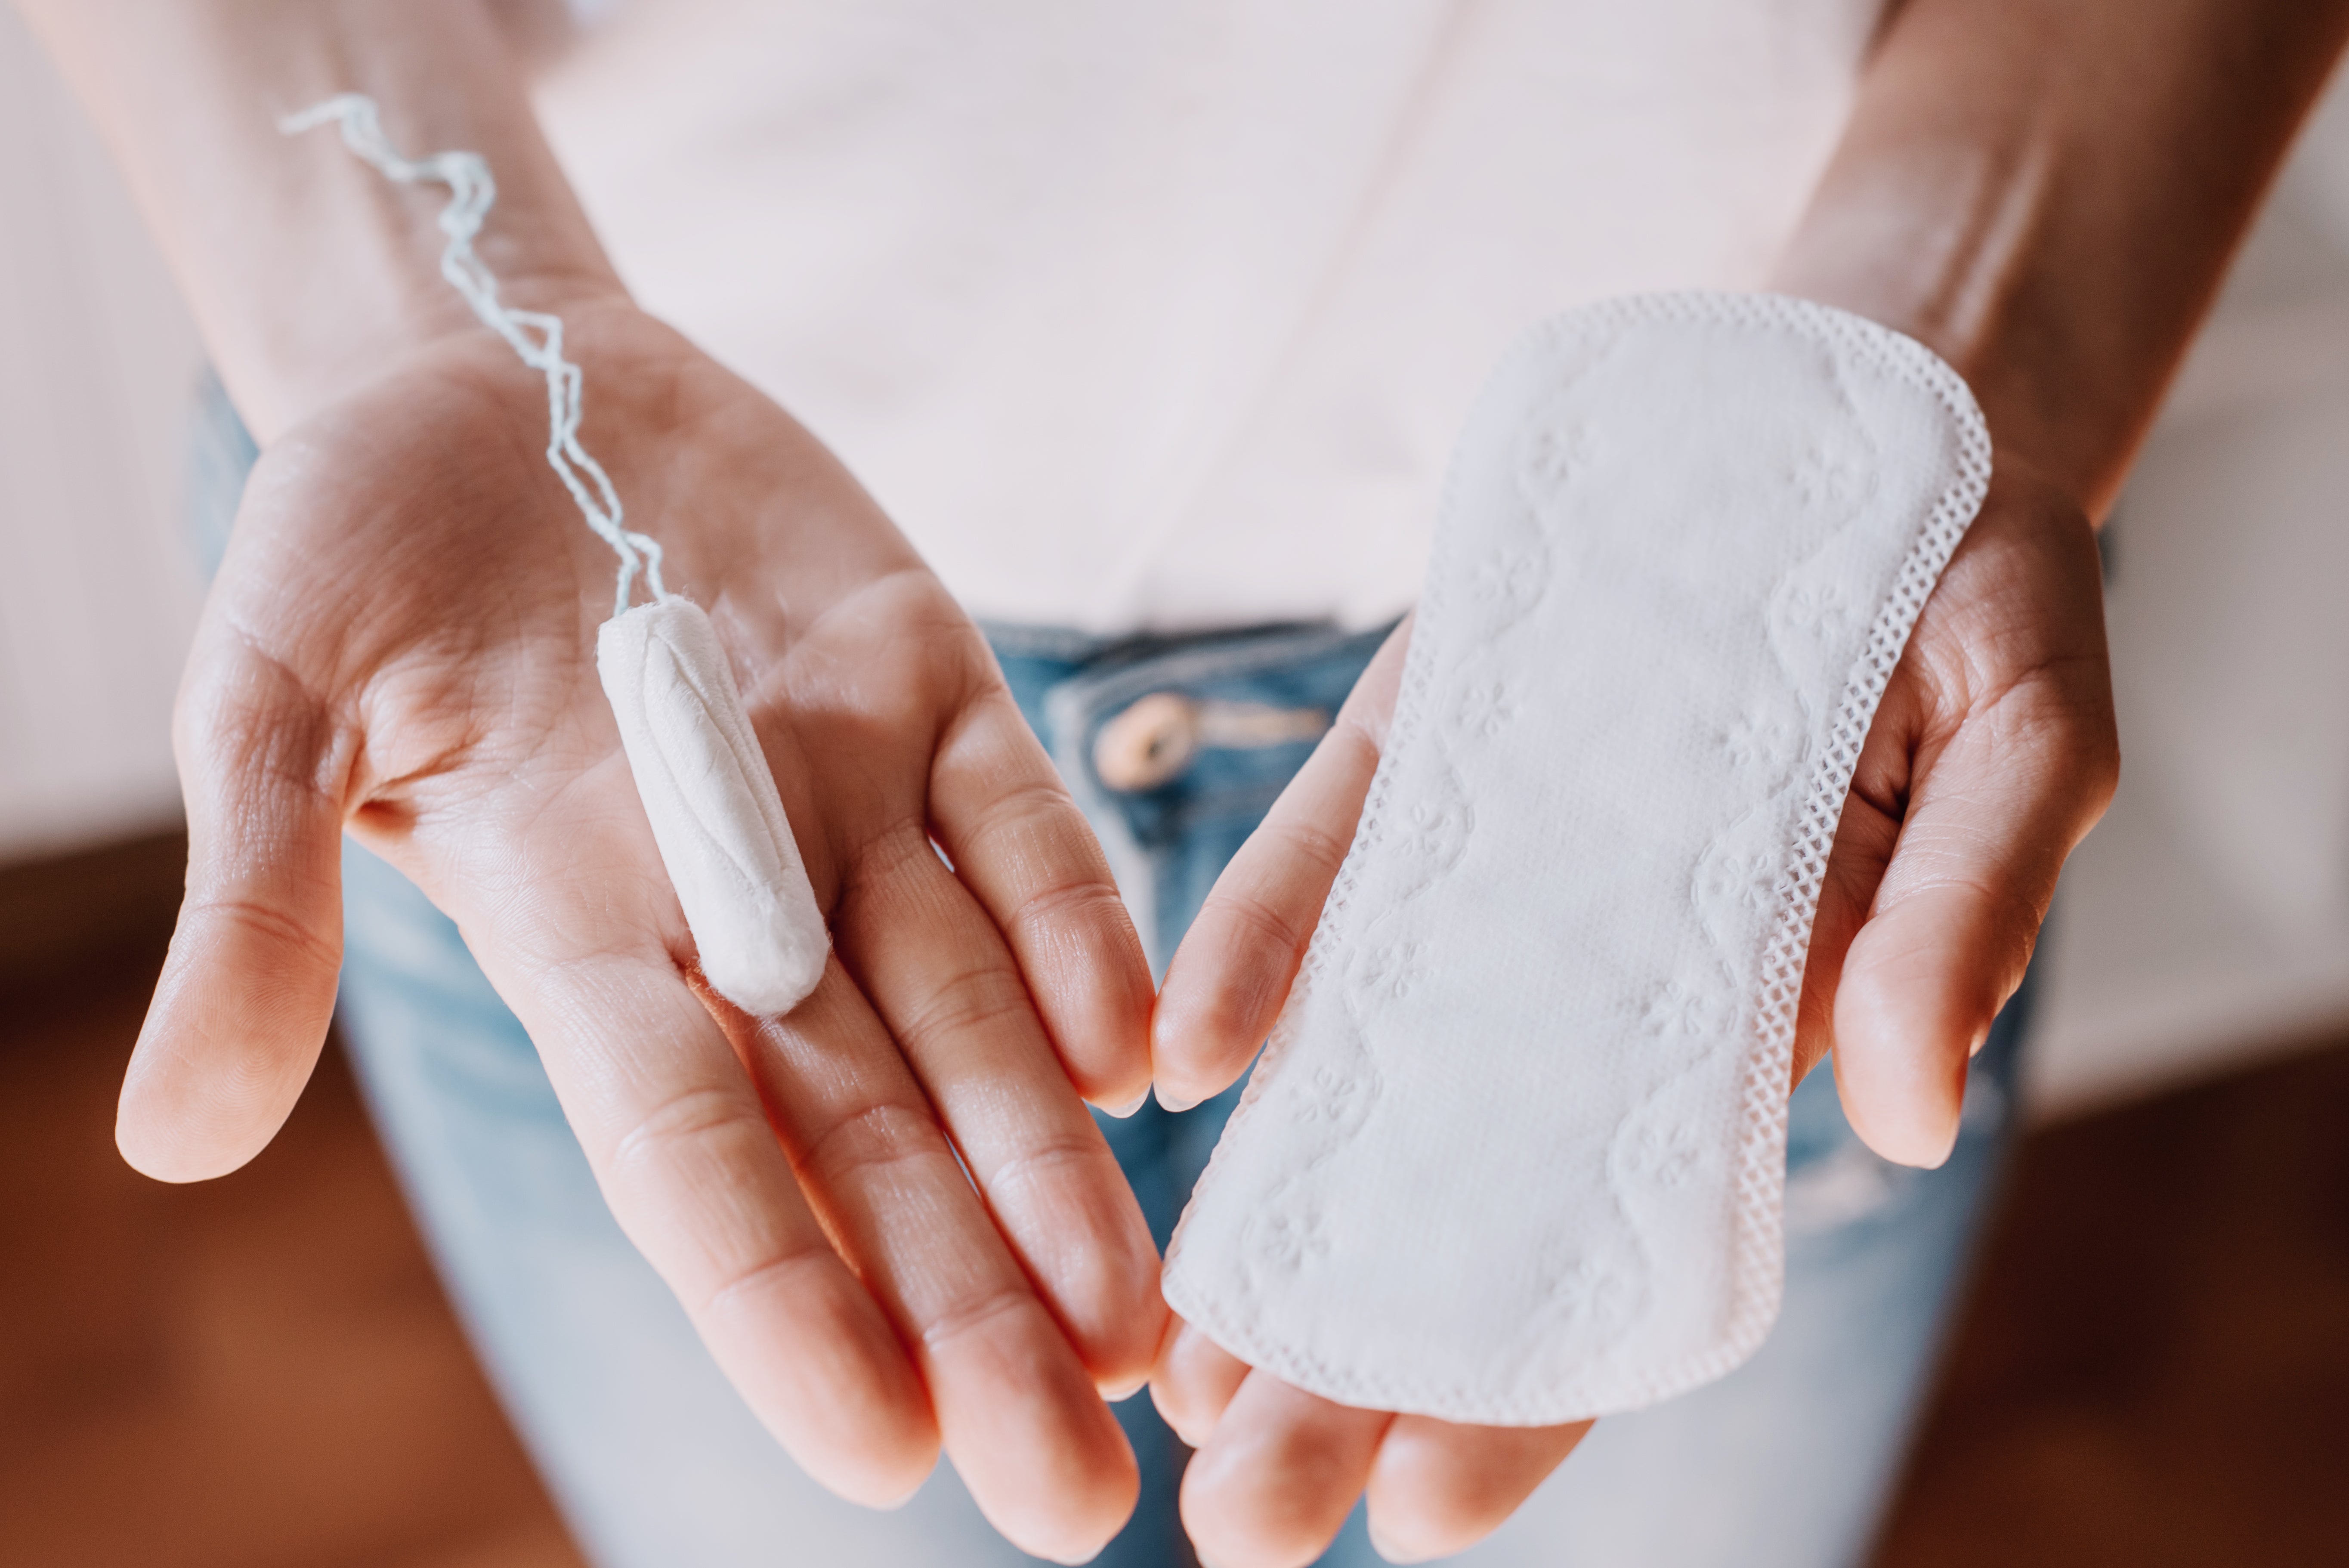 Are Tampons Making My Period Cramps Worse?